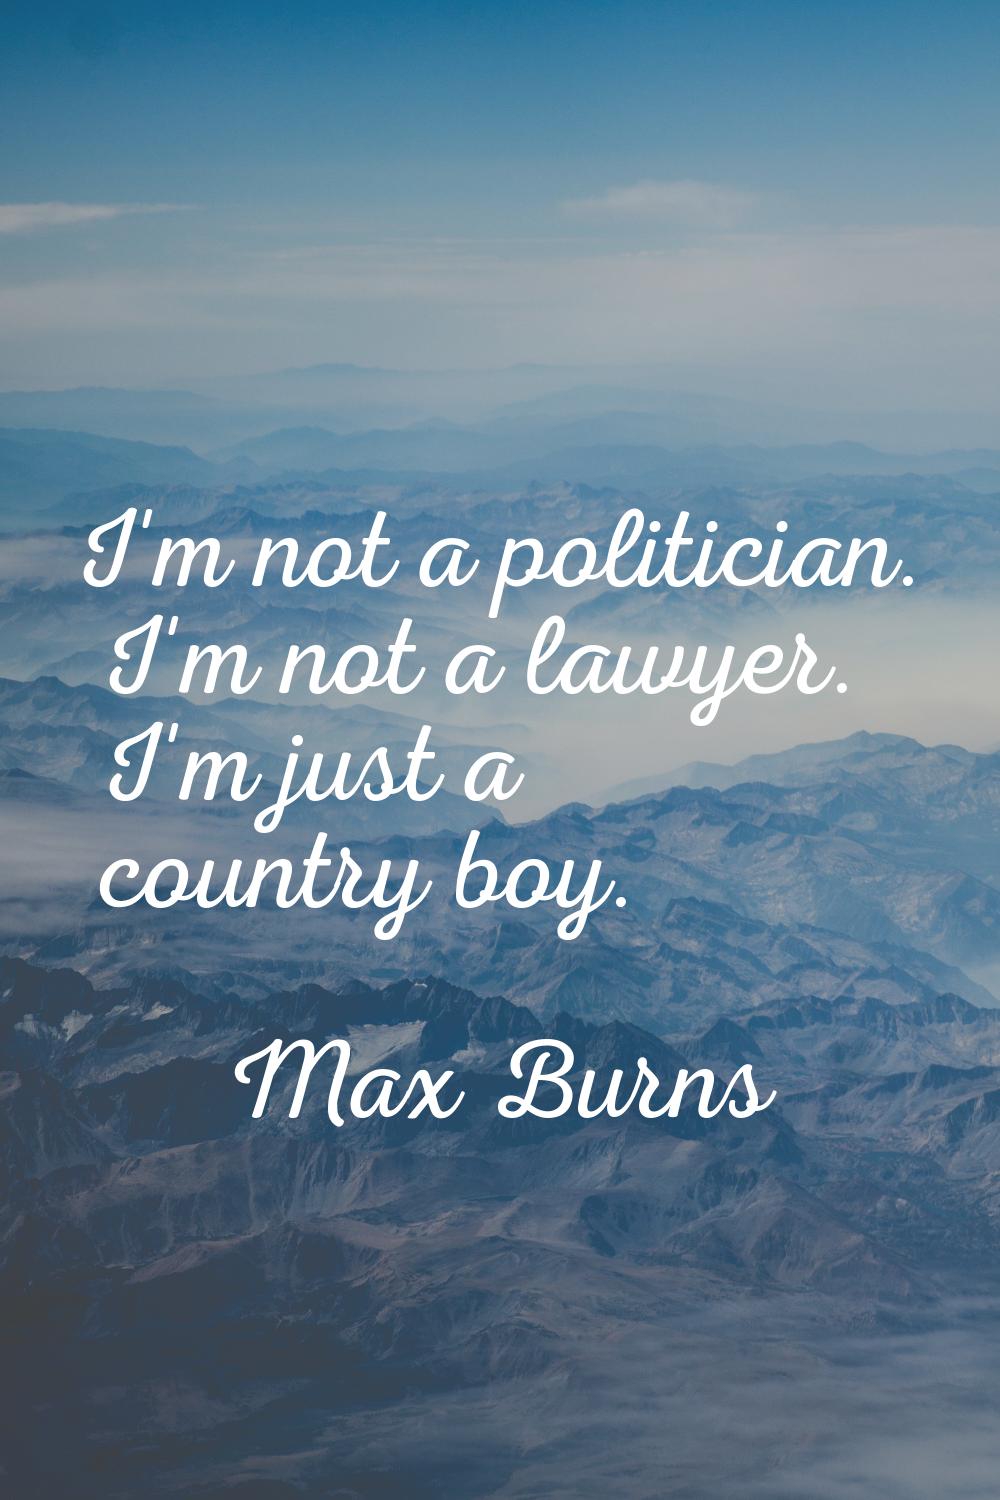 I'm not a politician. I'm not a lawyer. I'm just a country boy.